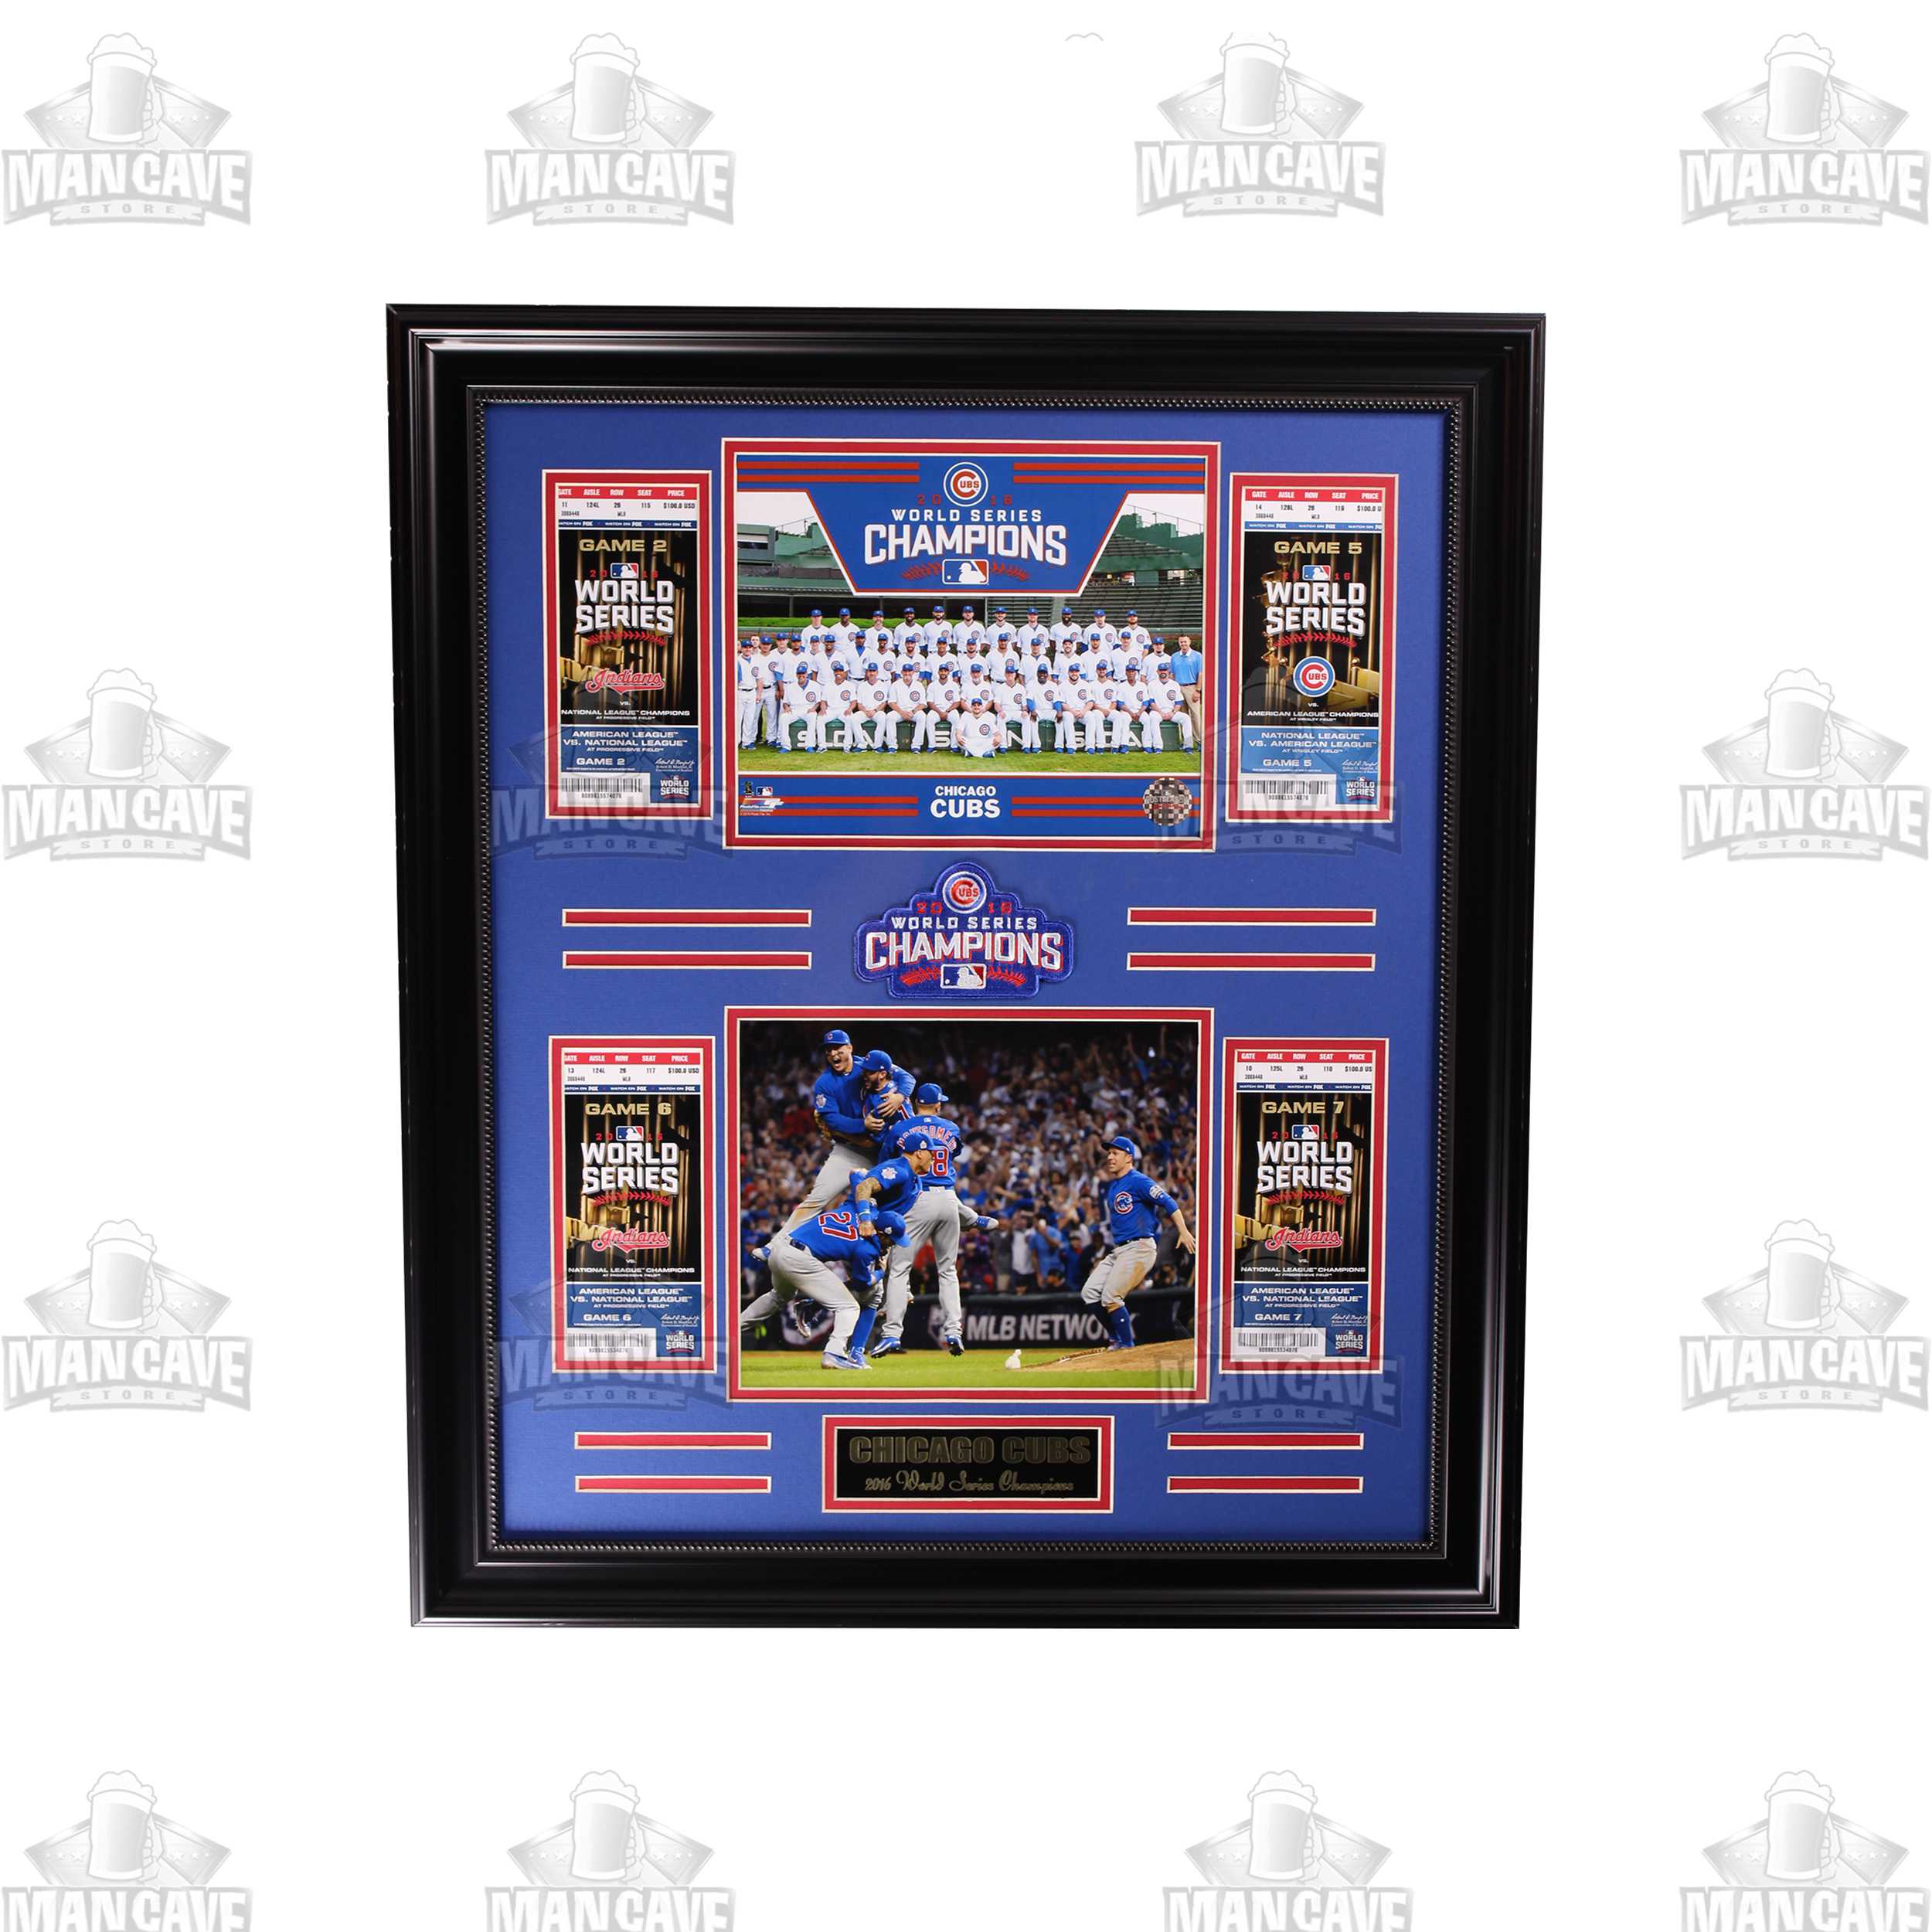 Chicago Cubs Photo Ticket Large Frame